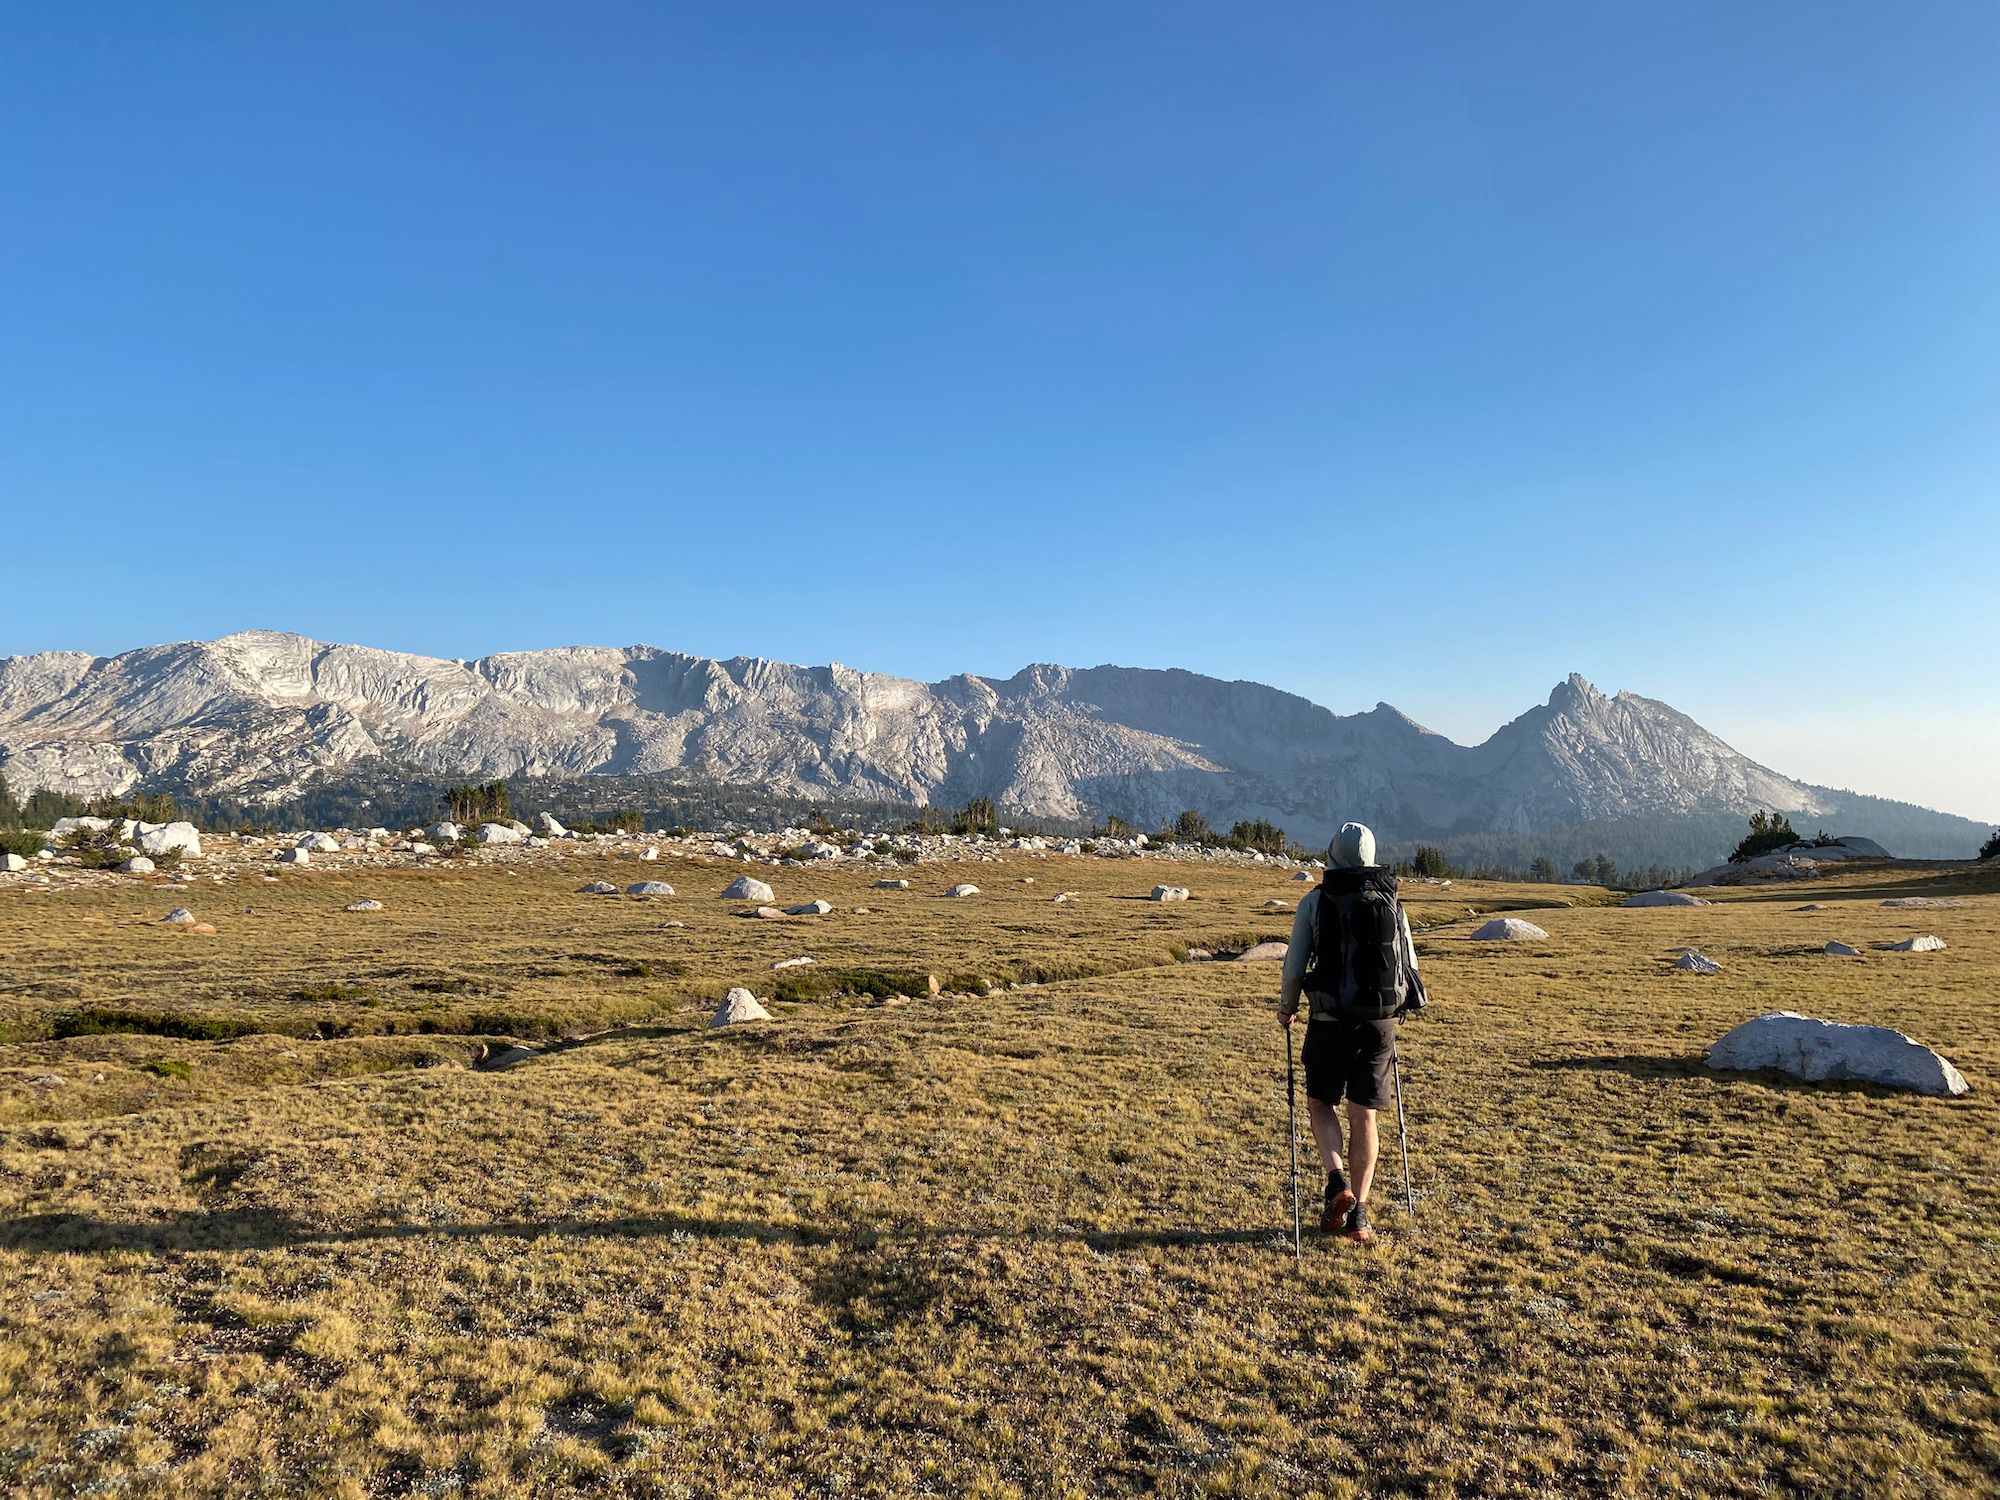 A backpacker walking through a large open meadow with a jagged mountain range in the distance.